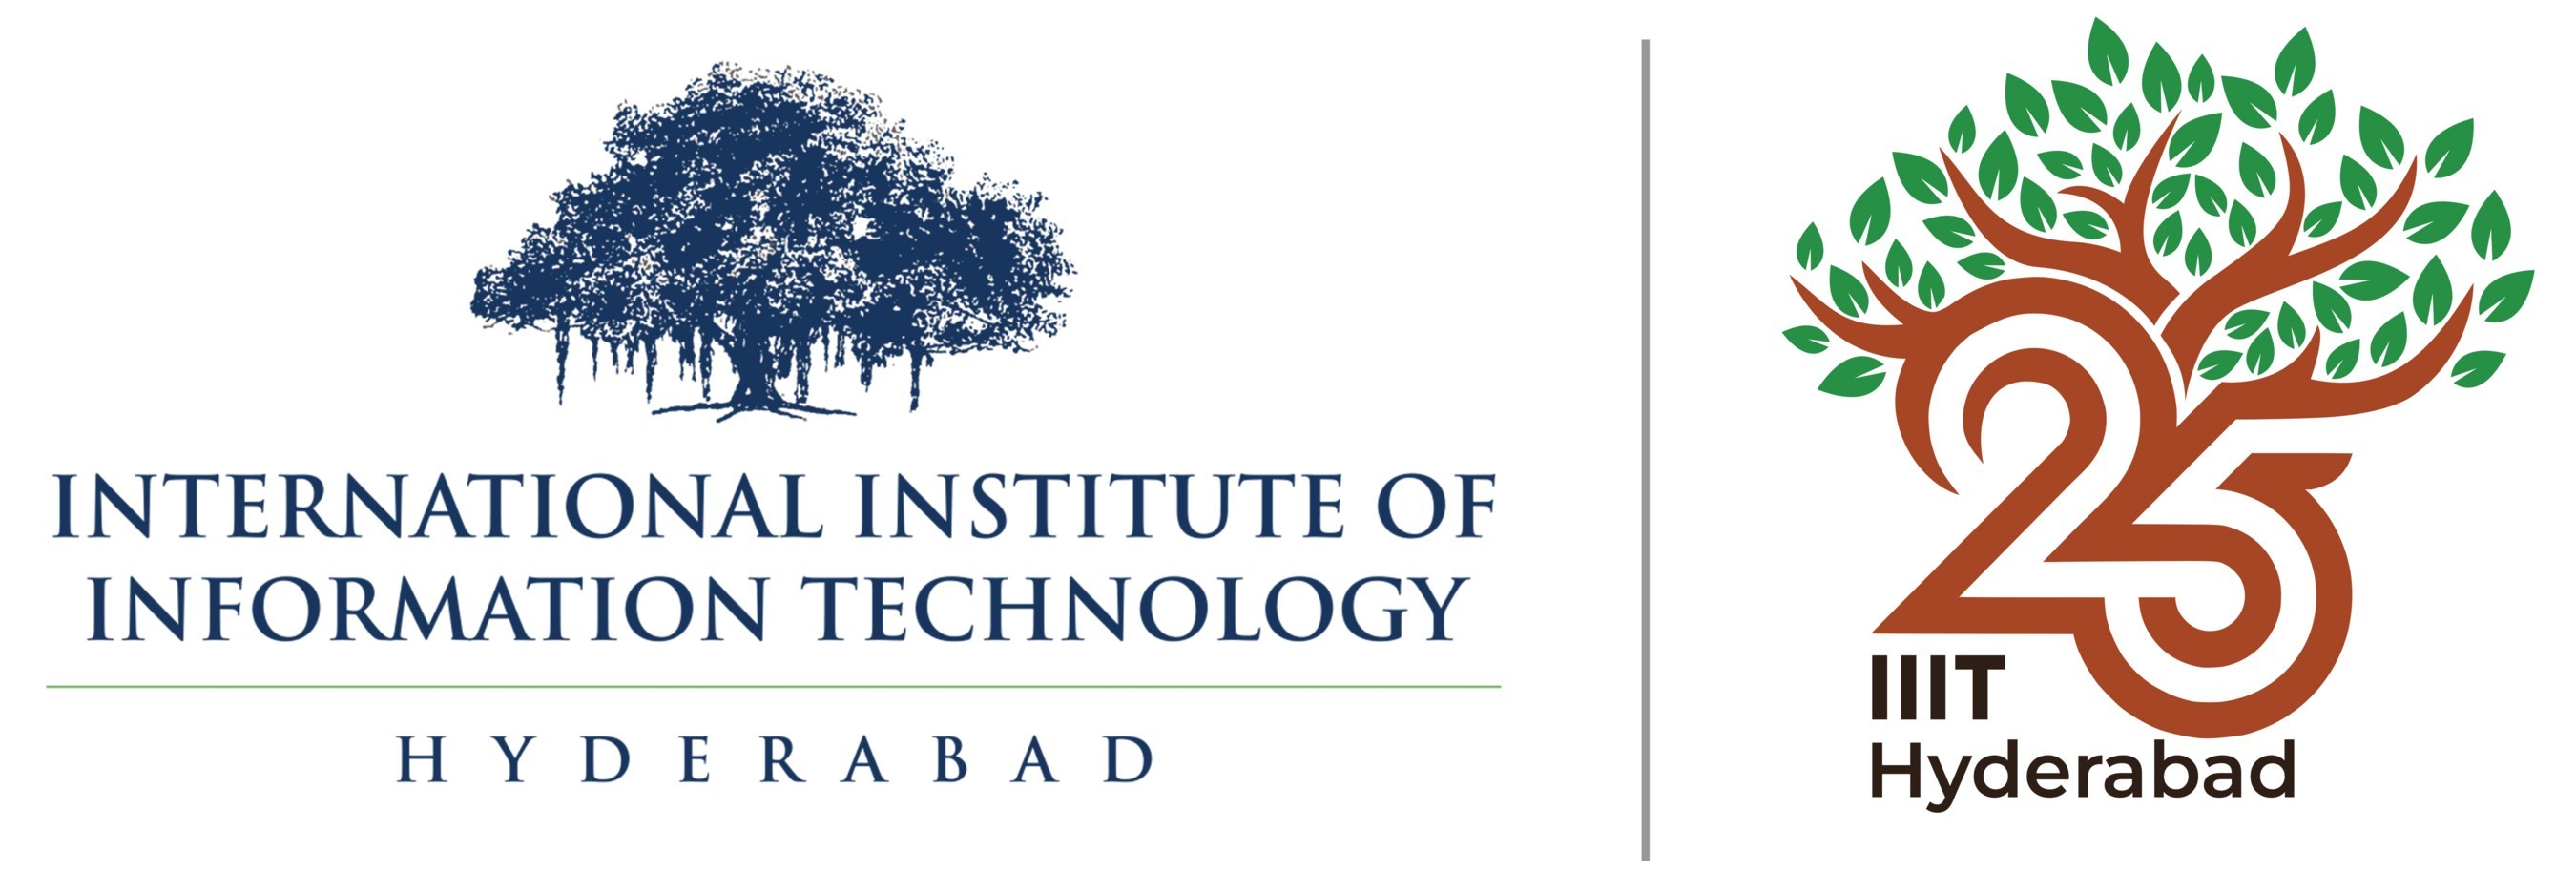 Admissions open to iHub-Data's 6-month Student Training Program on AI/ML at IIIT Hyderabad